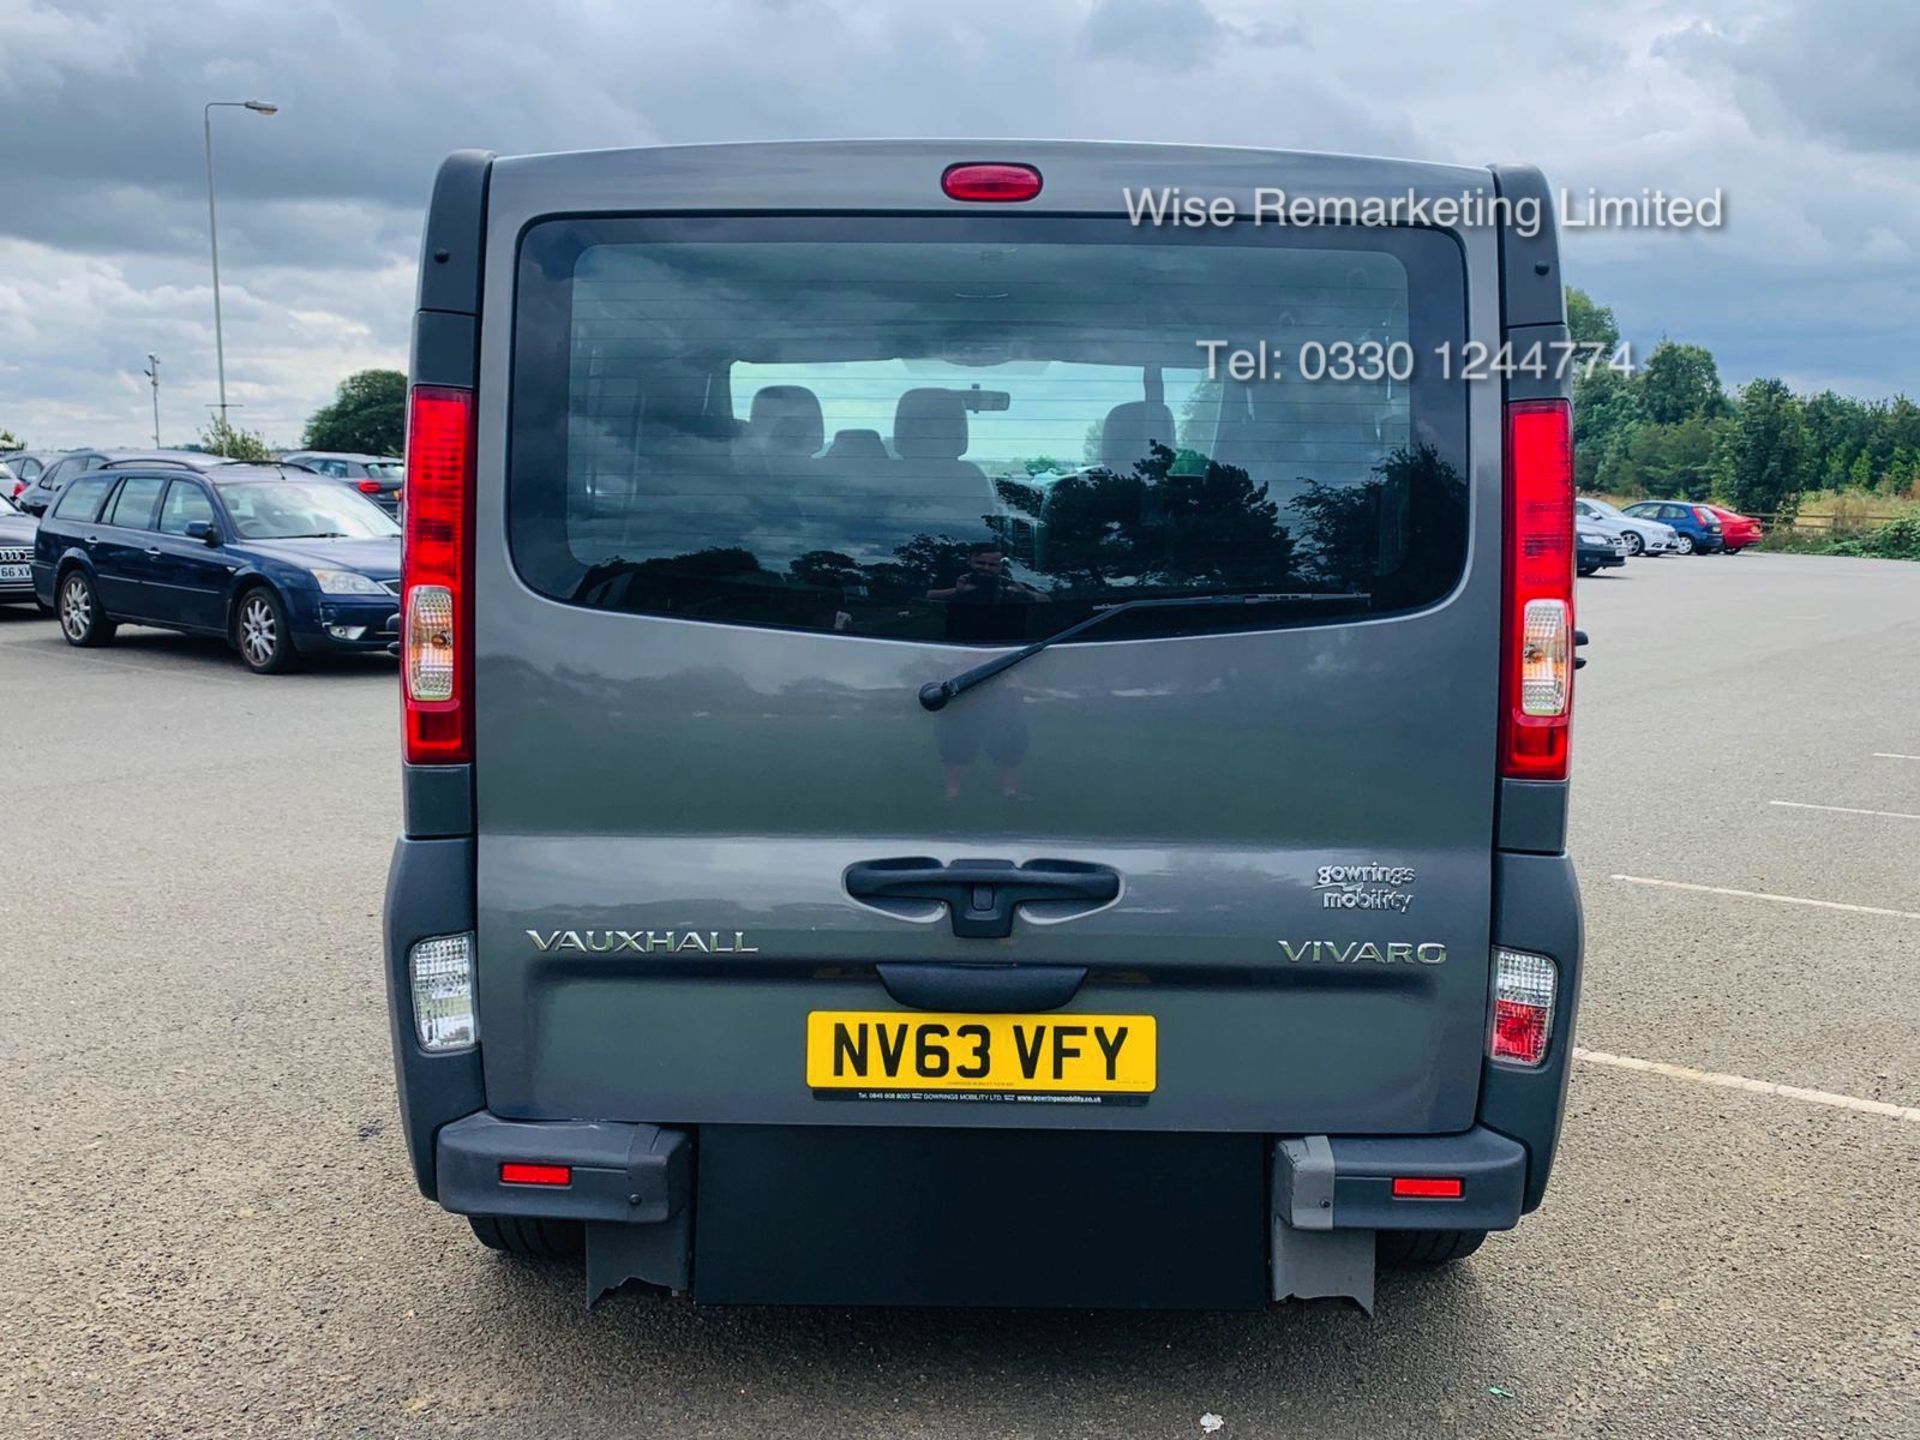 Vauxhall Vivaro 2.0 CDTI 2900 Minibus - 2014 Model - Wheel Chair Access -1 Owner From New -History - Image 6 of 21